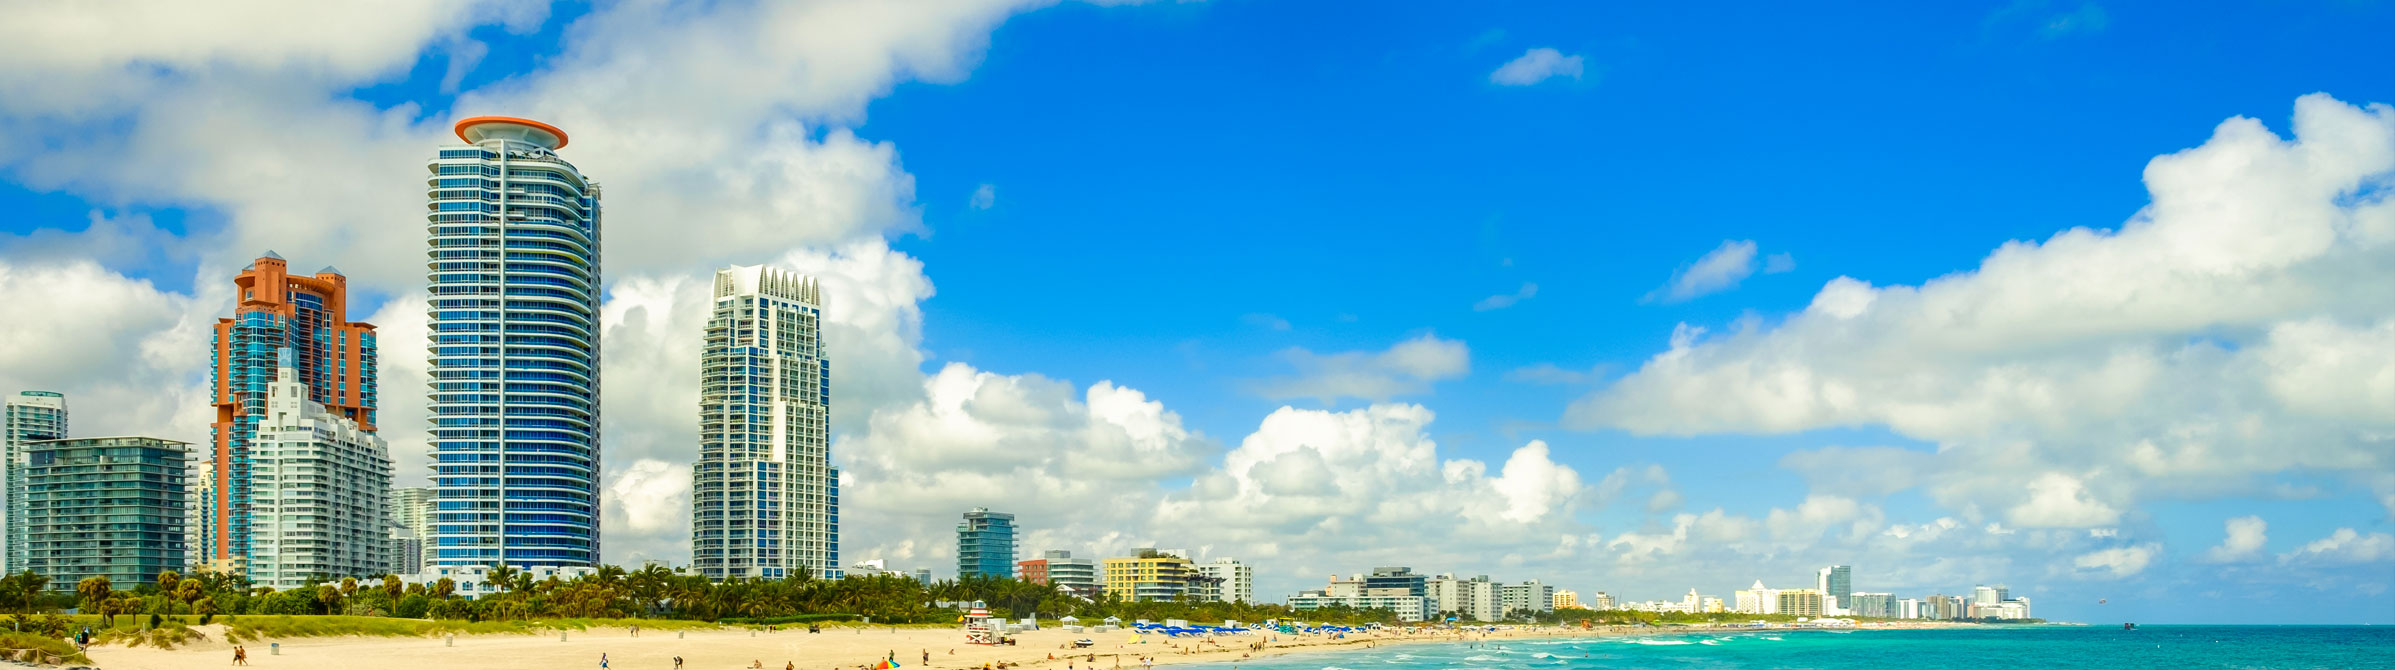 city of miami beach | the official website of the city of miami